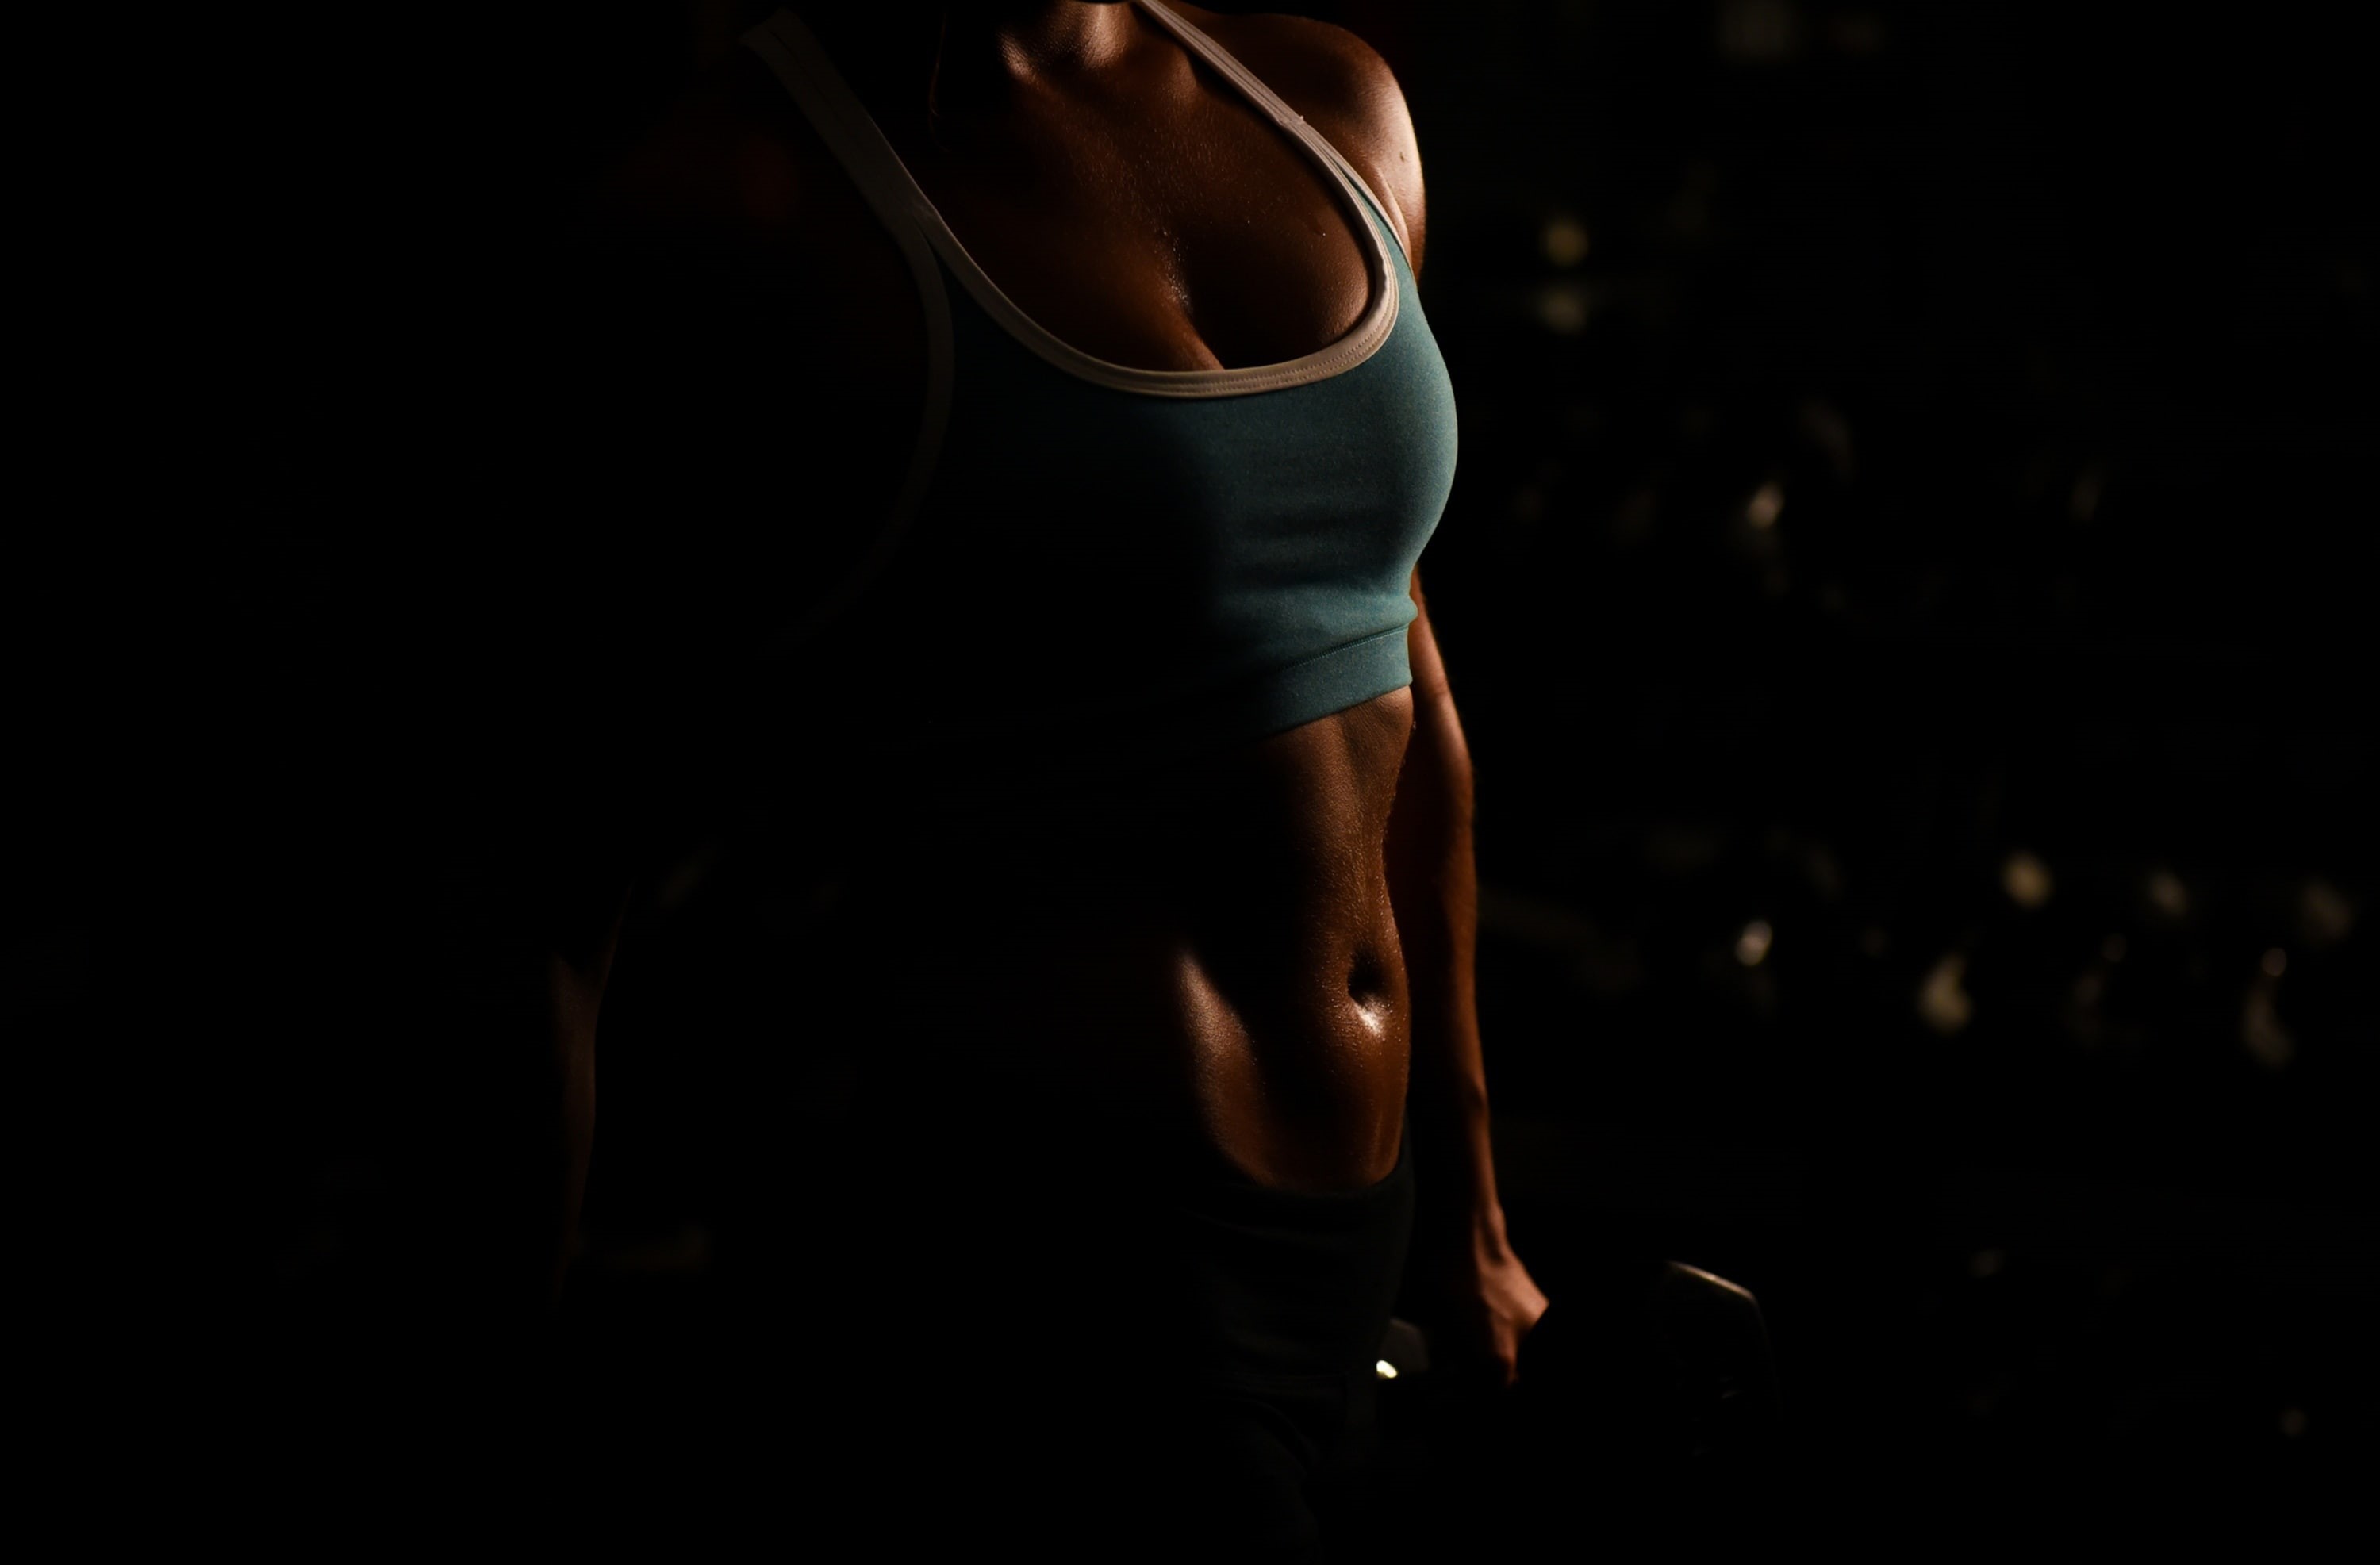 Wallpaper / person, women, Sport, real people, Female, athletic, vitality, clothing, Muscles, weights, athlete, midsection, Woman, workout, sports clothing, healthy free download